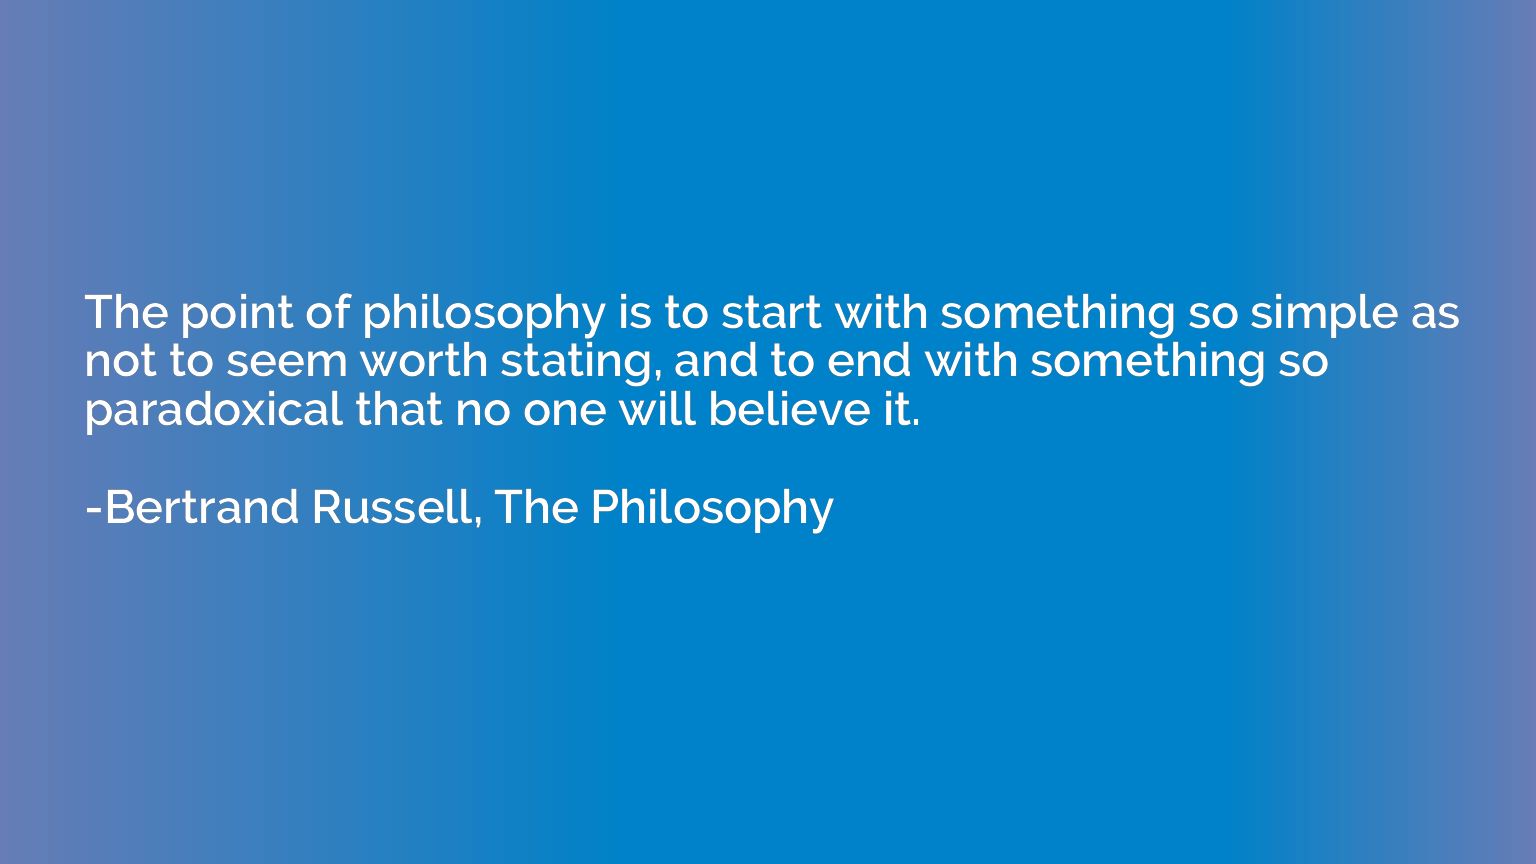 The point of philosophy is to start with something so simple